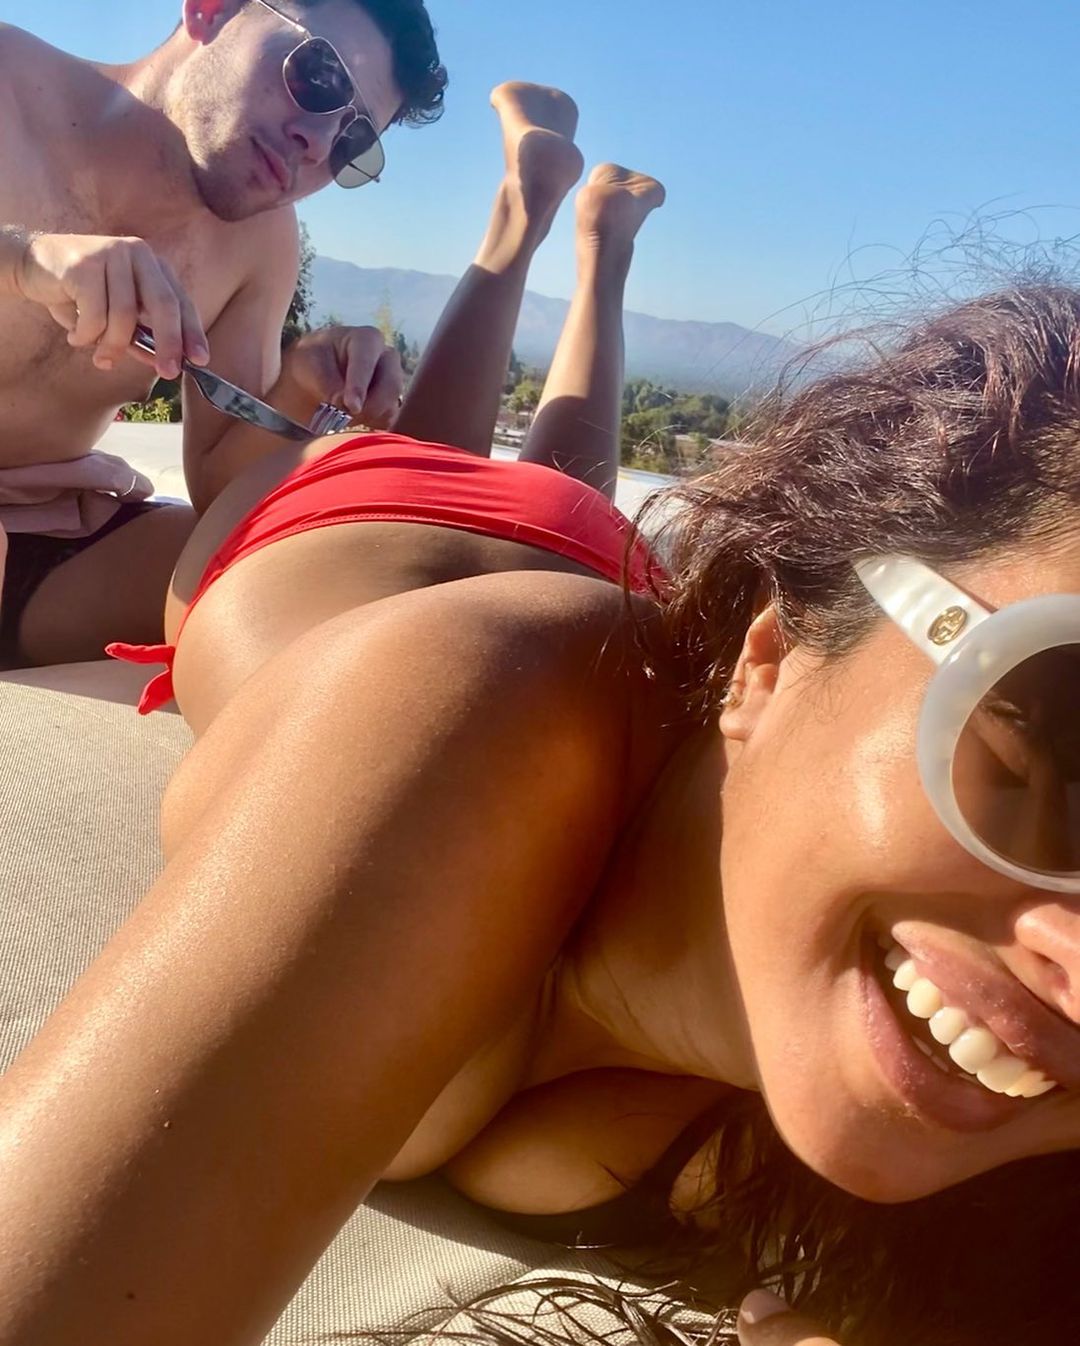 Remember the time when Nick Jonas was relishing his "snack," sorry, we meant Priyanka Chopra, at their California house? The actress shared this photo from their good time. (Image: Instagram)